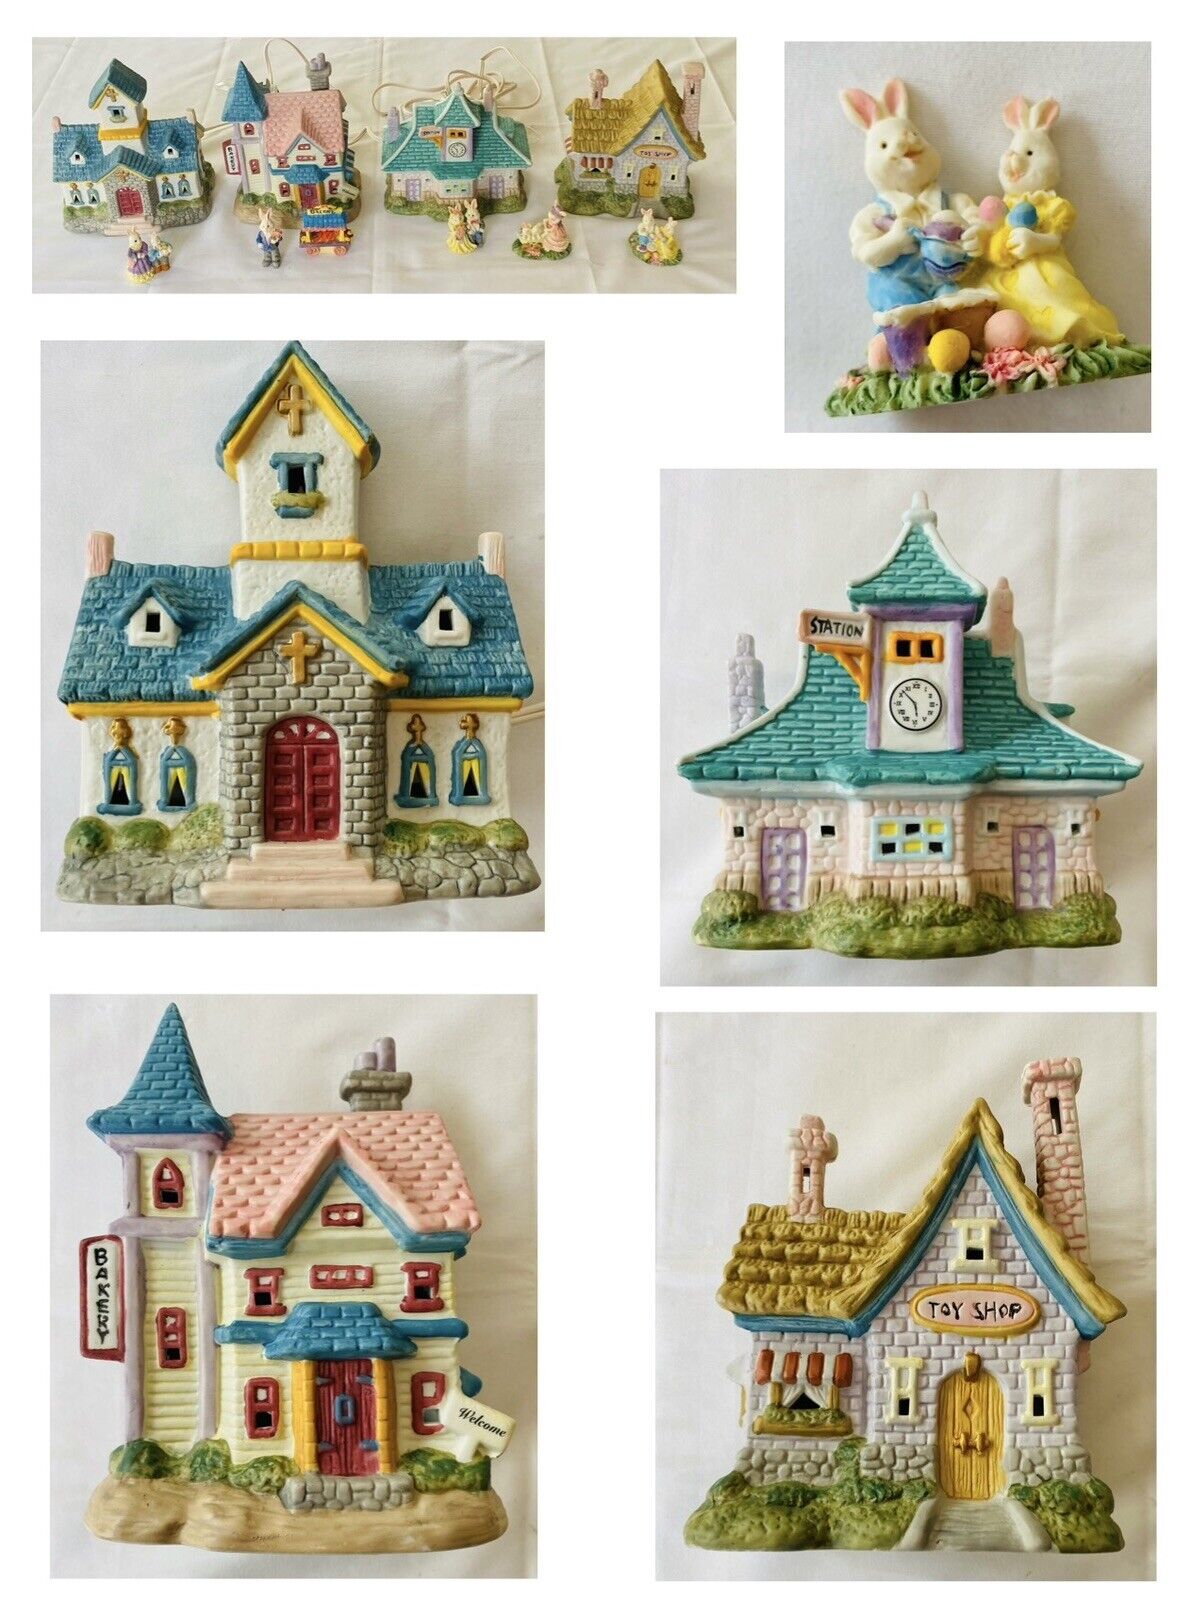 VINTAGE Easter Village Lighted House Buildings & Figurines with Cords 10-Pc Set